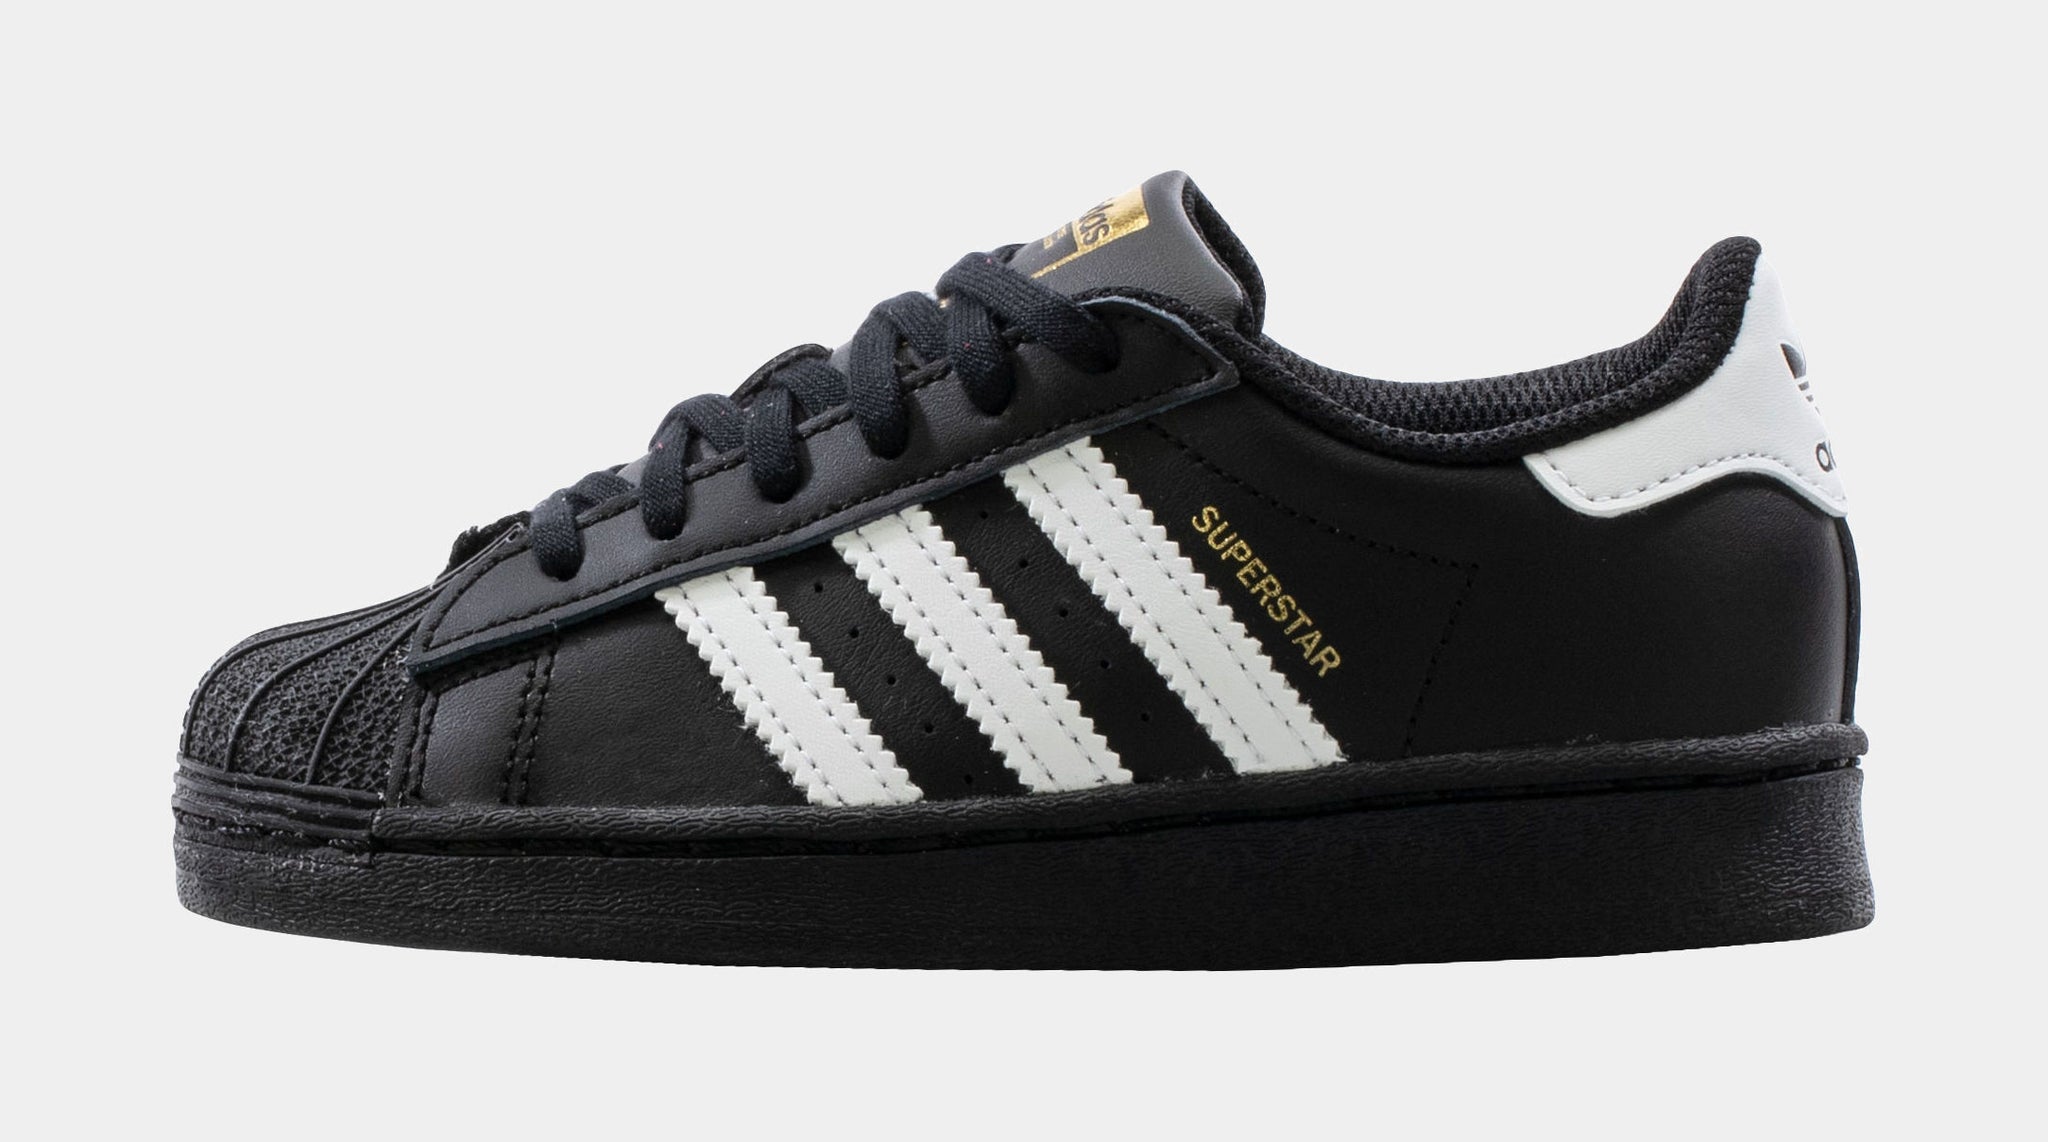 adidas Originals Superstar sneakers in black and white